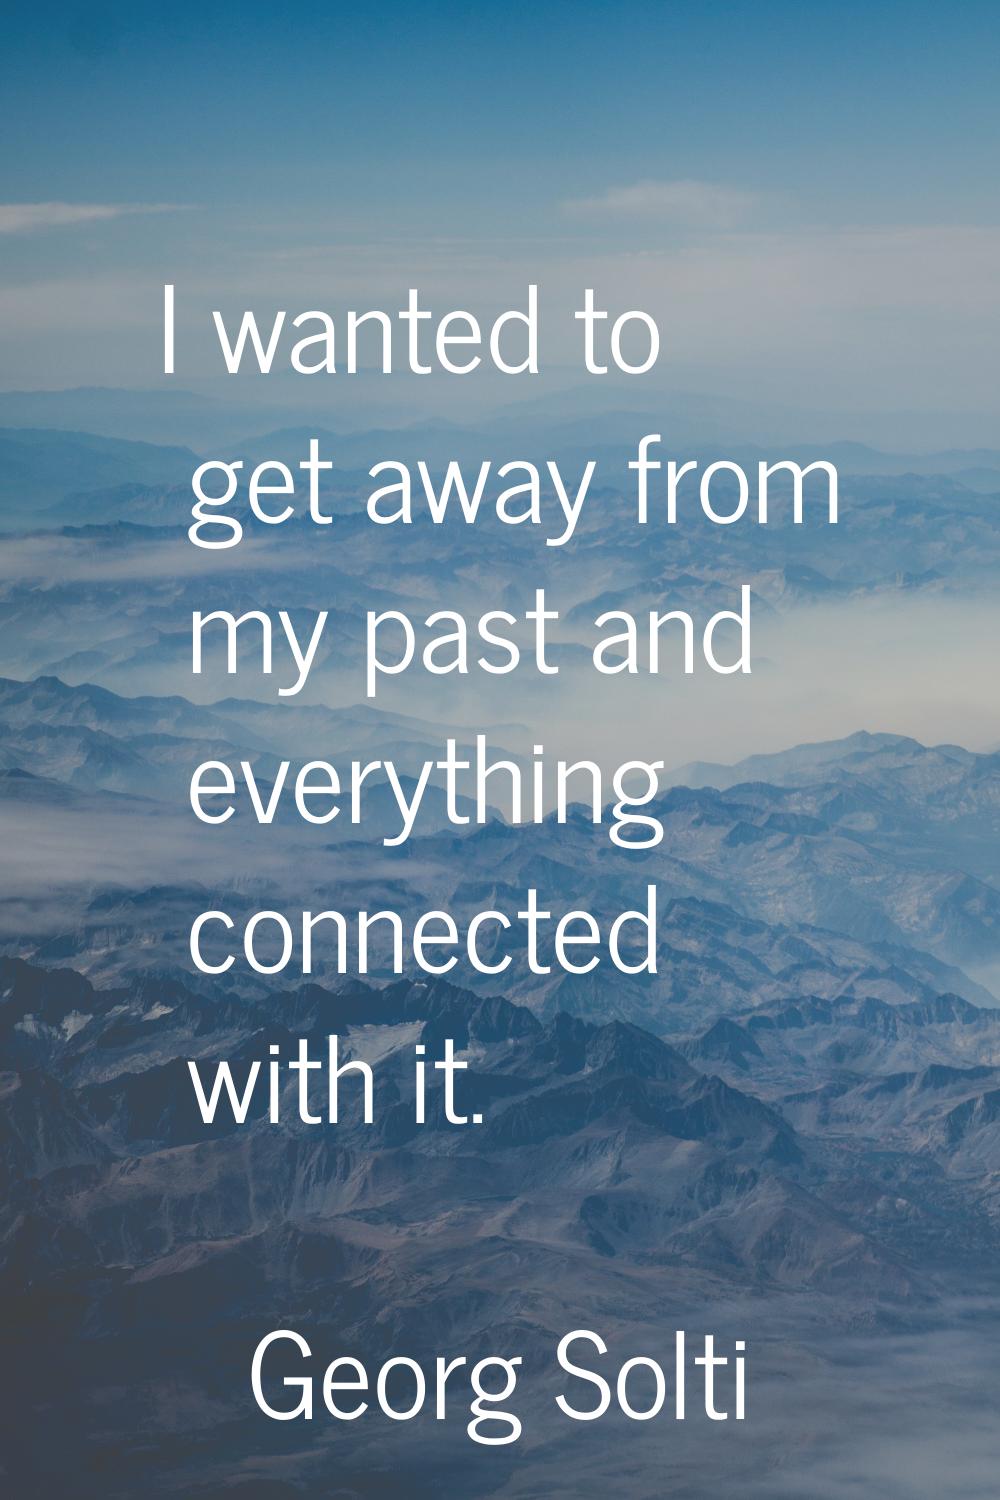 I wanted to get away from my past and everything connected with it.